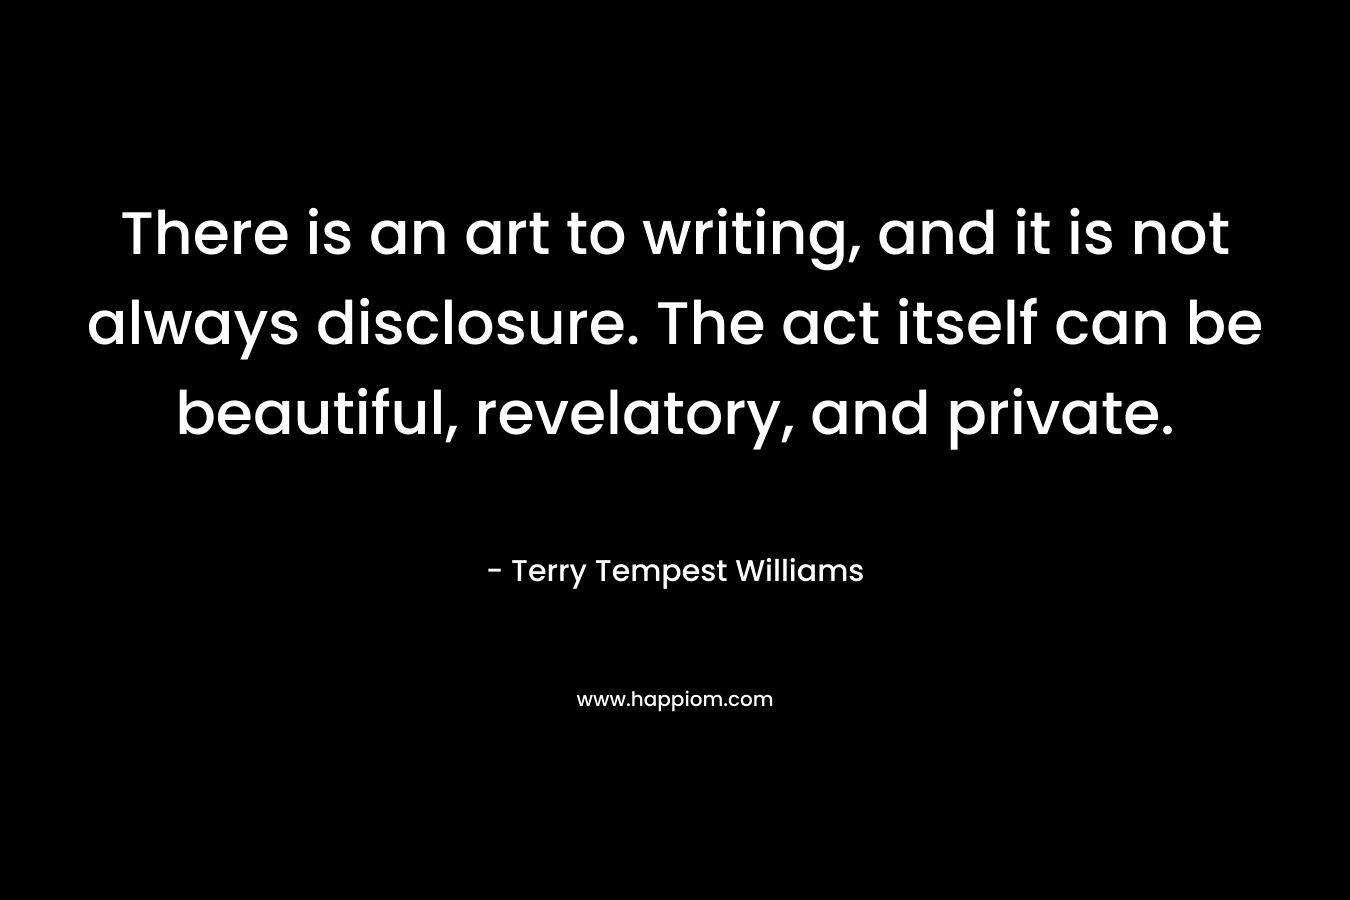 There is an art to writing, and it is not always disclosure. The act itself can be beautiful, revelatory, and private.